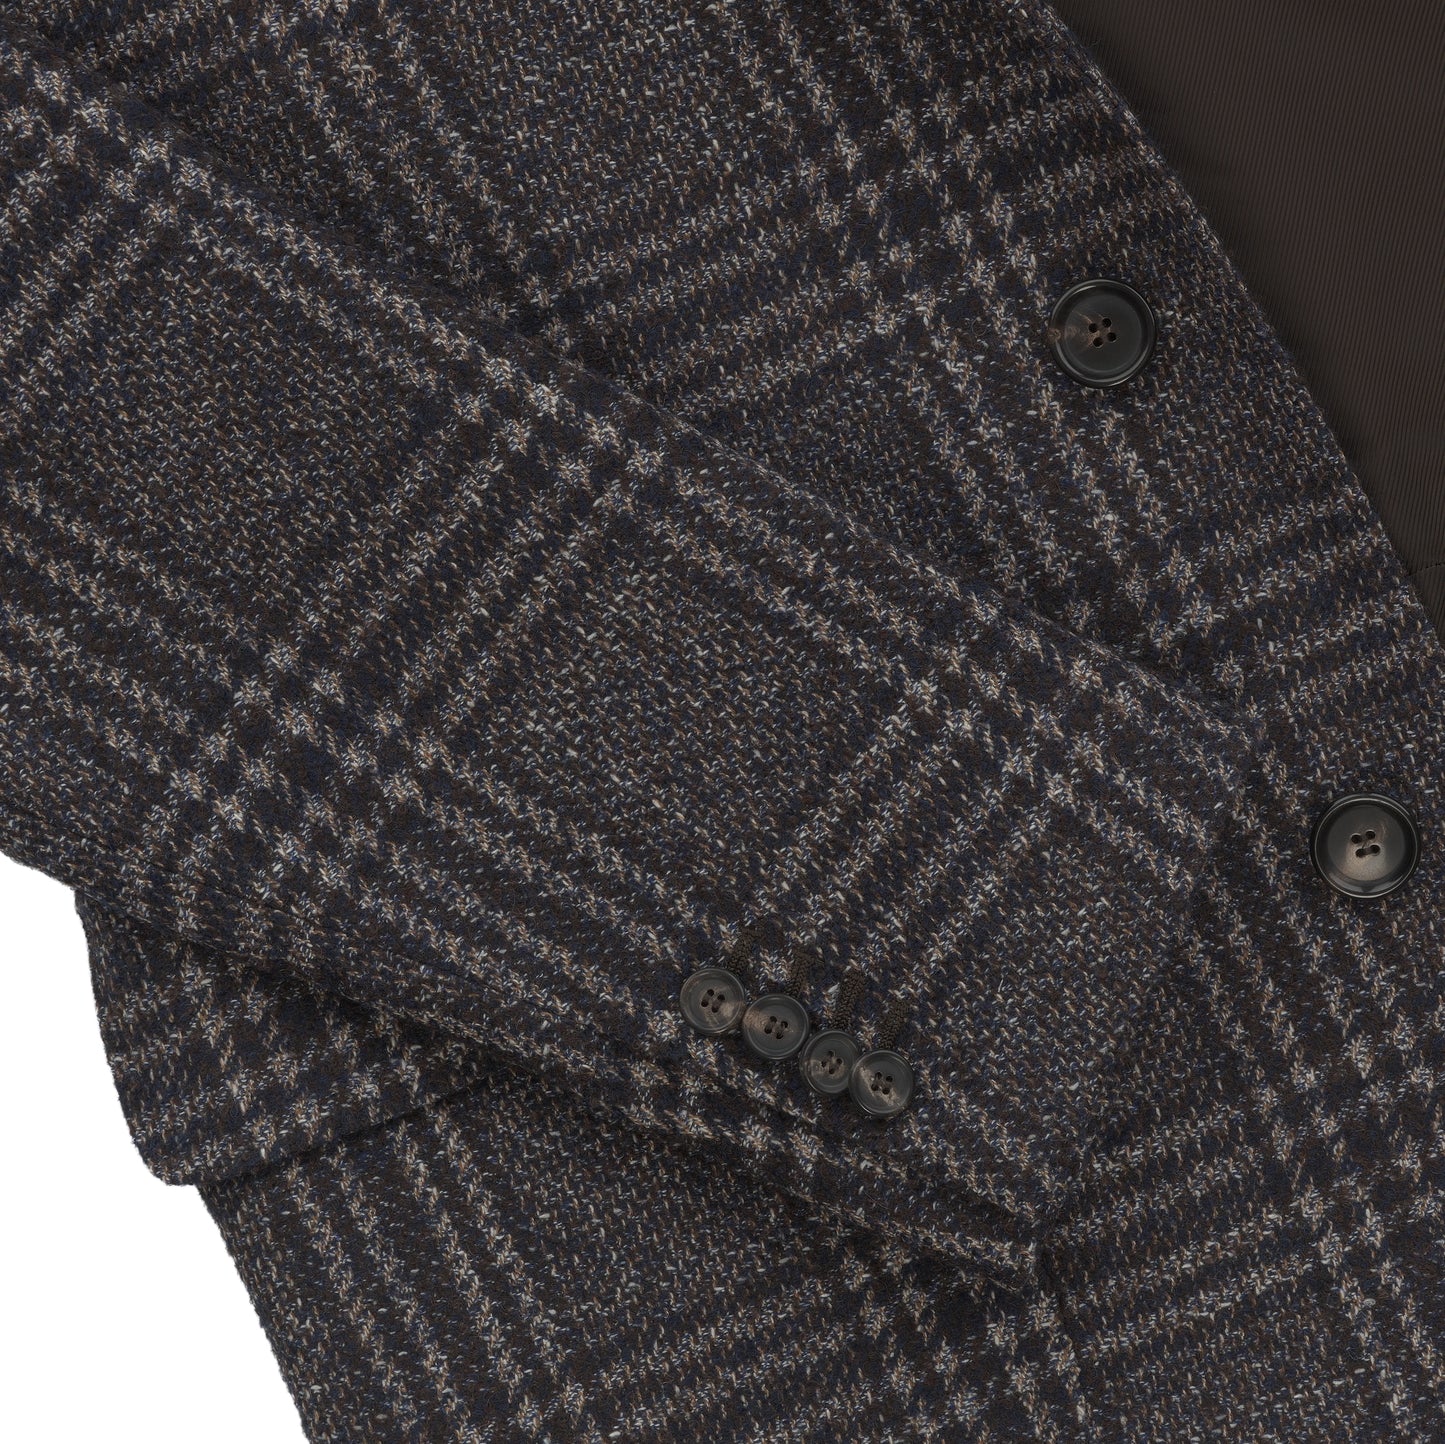 Single-Breasted Wool Coat in Dark Blue Multicolor. Exclusively Made for Sartale